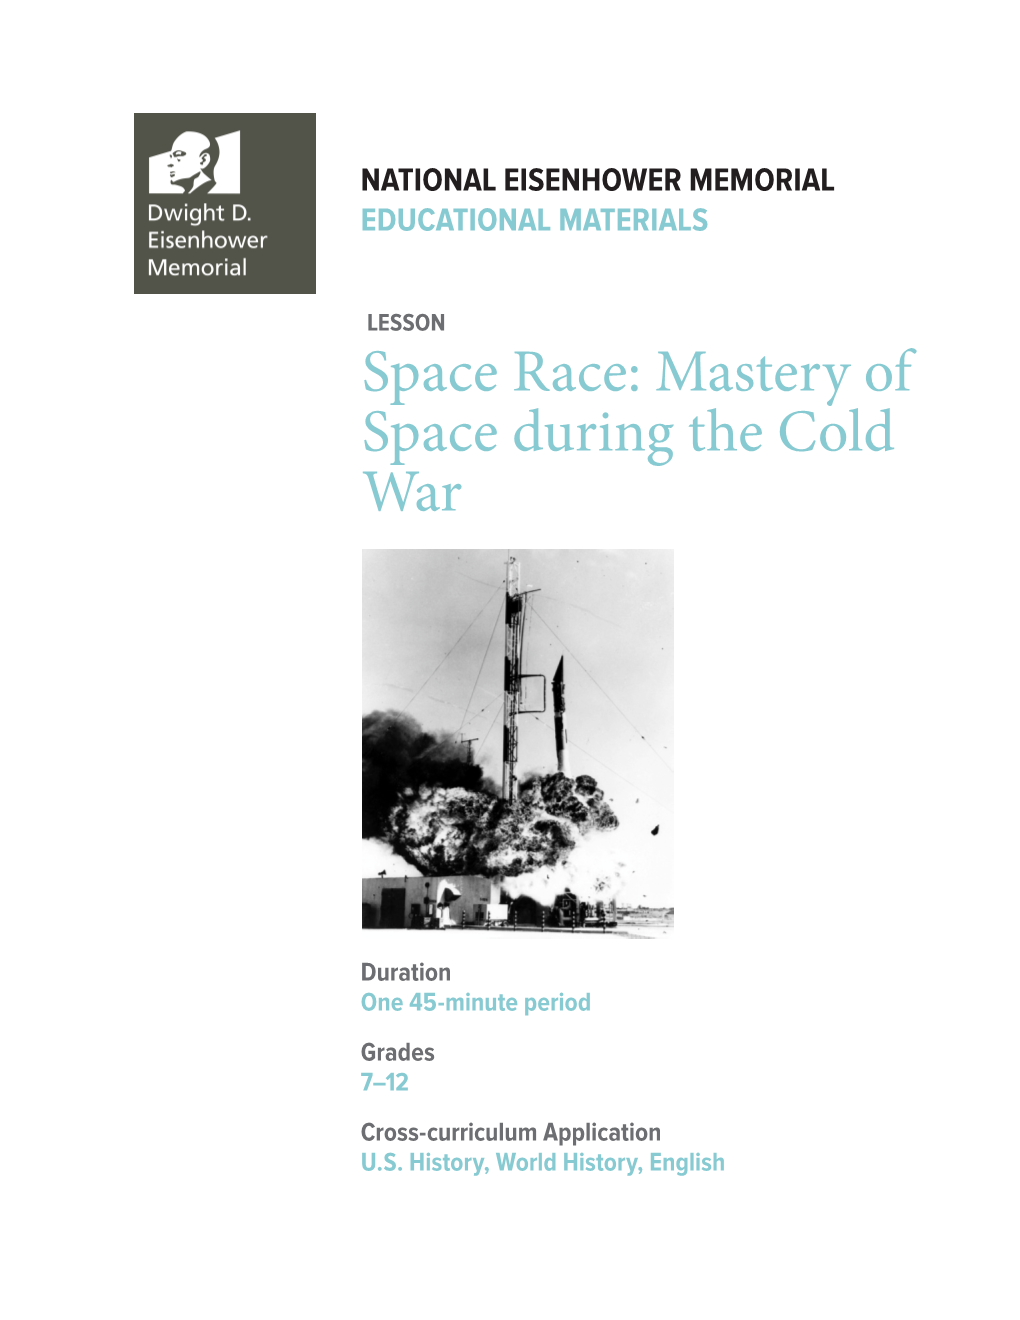 Space Race: Mastery of Space During the Cold War